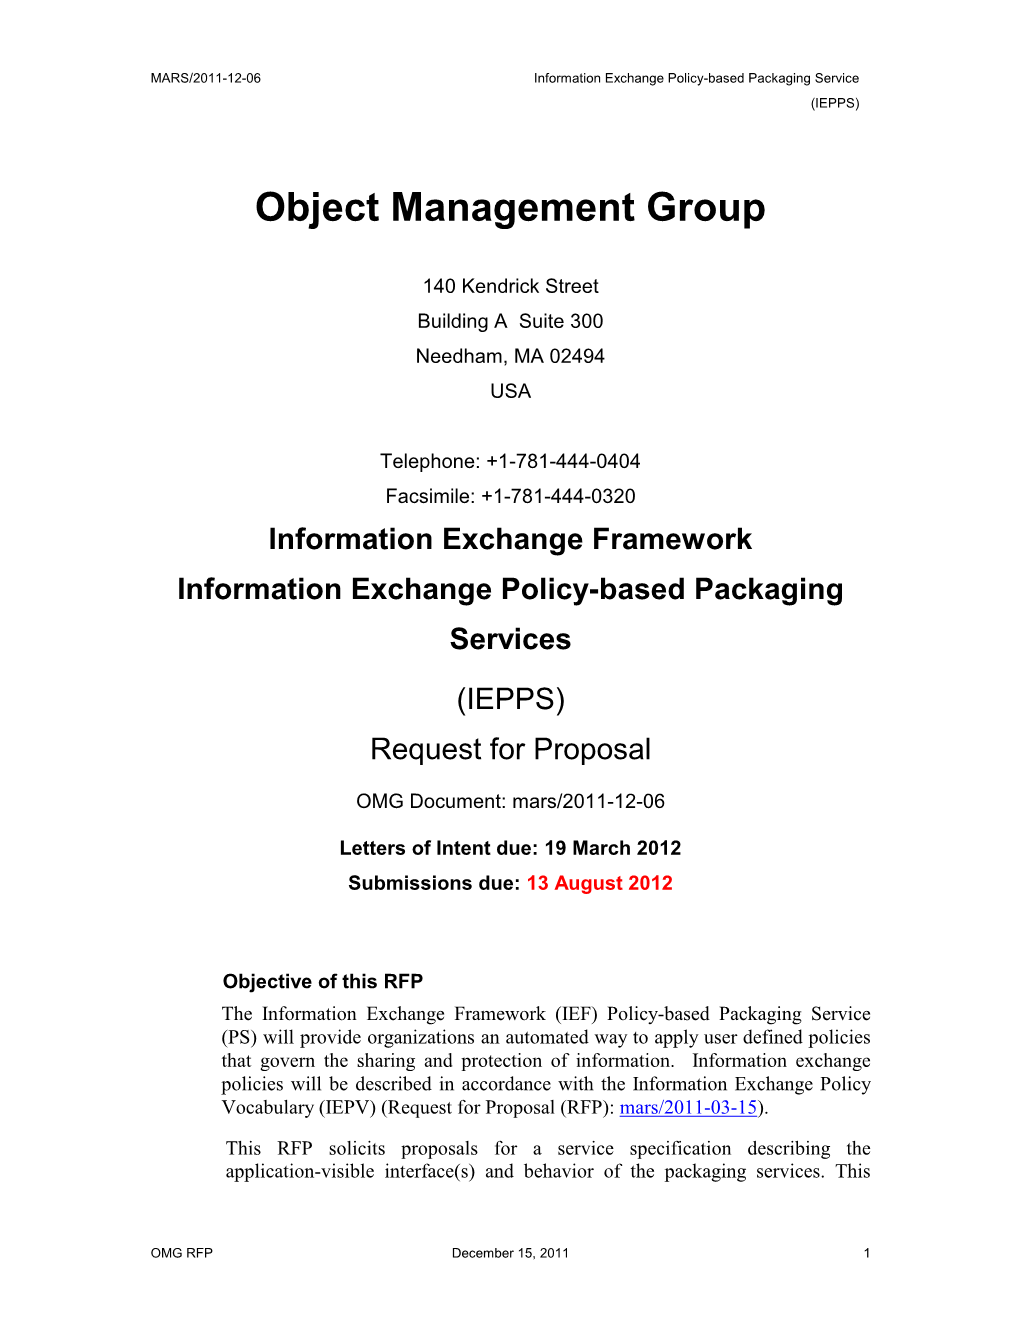 Information Exchange Policy-Based Packaging Service RFP